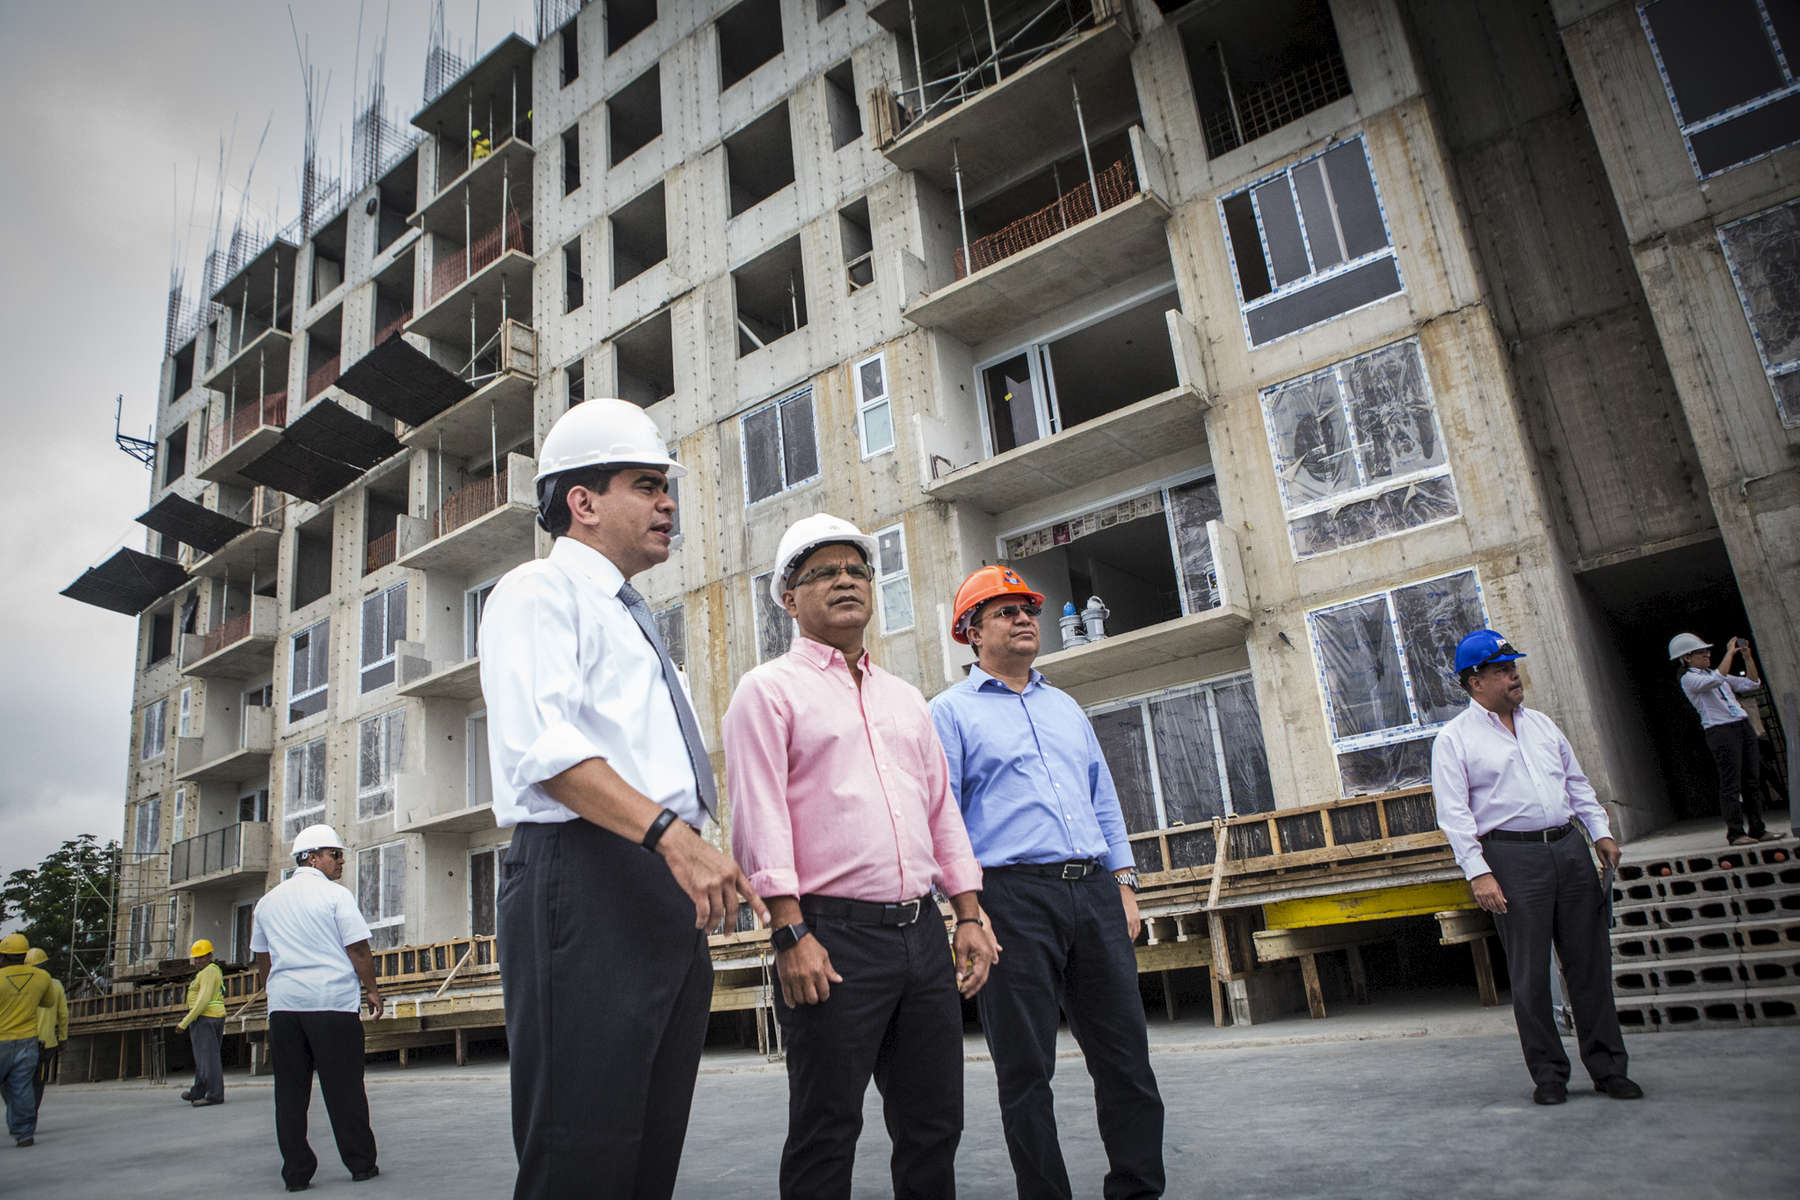 San Salvador, El Salvador- General Manager of Grupo Roble, Rafael Menéndez, Vice President of El Salvador, Óscar Ortiz, and President of ANDA (National Administration of Aqueducts and Sewers), Felipe Rivas stand outside the Vista Tower construction site in San Salvador, El Salvador, June 2018. (Jane Hahn)